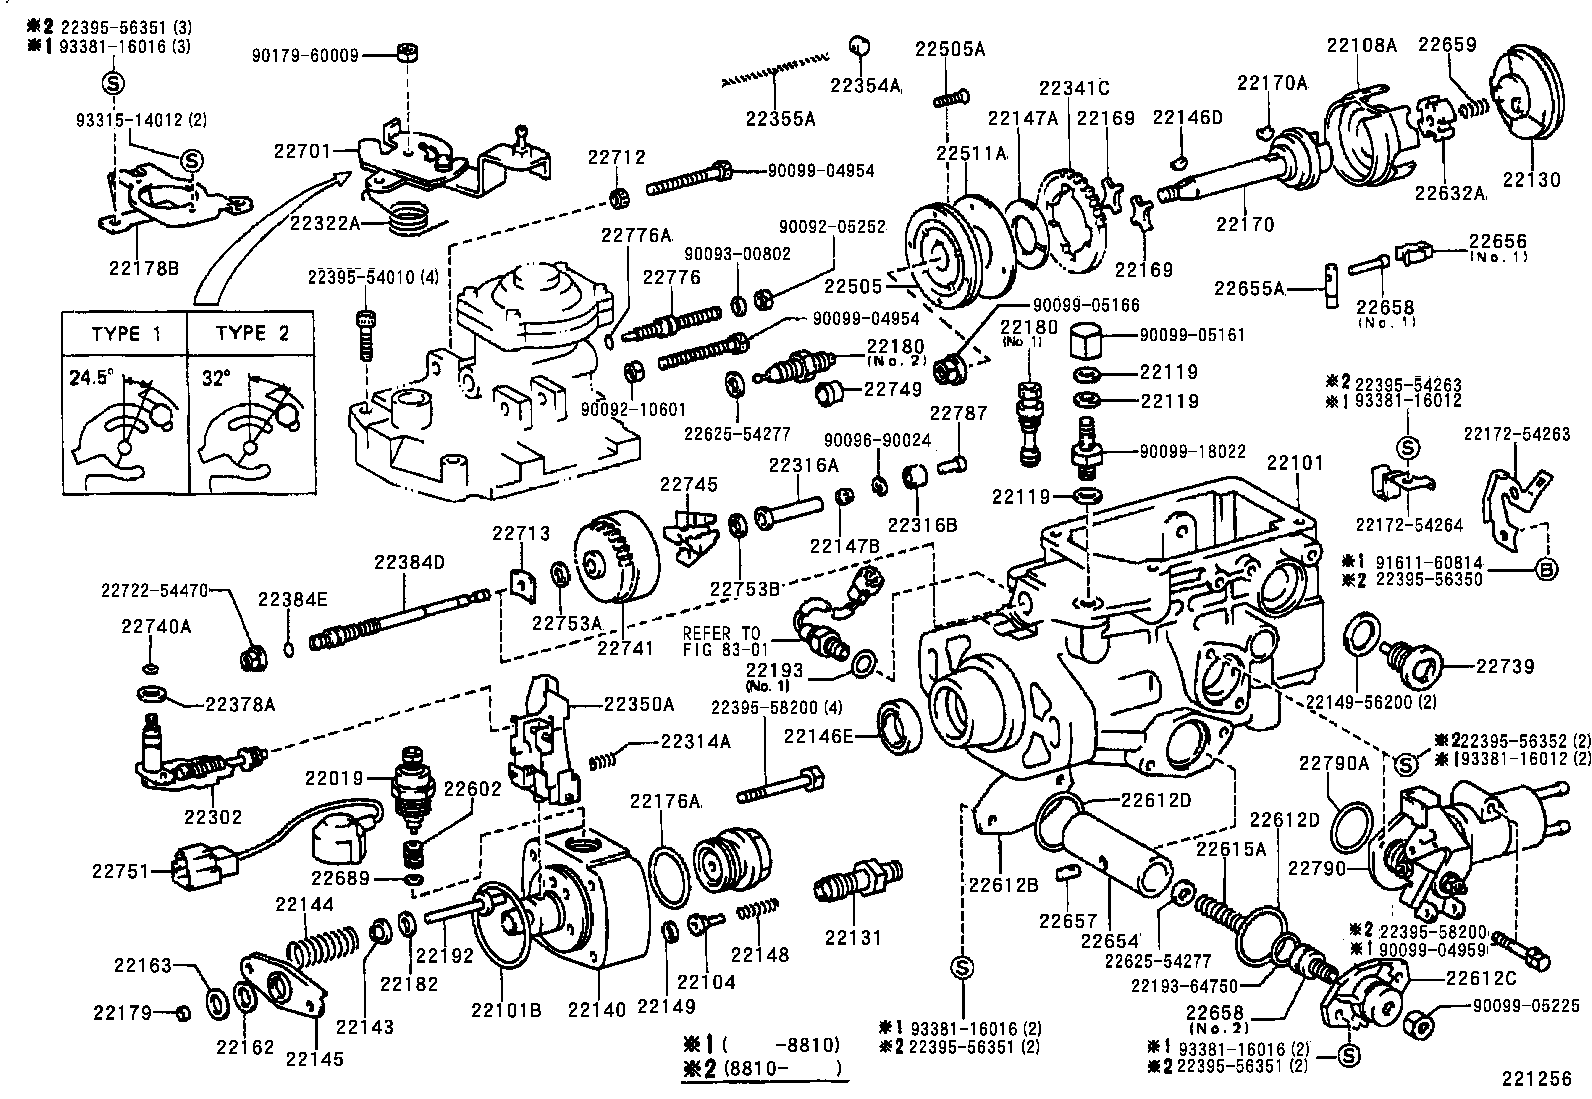  MARK 2 |  INJECTION PUMP BODY